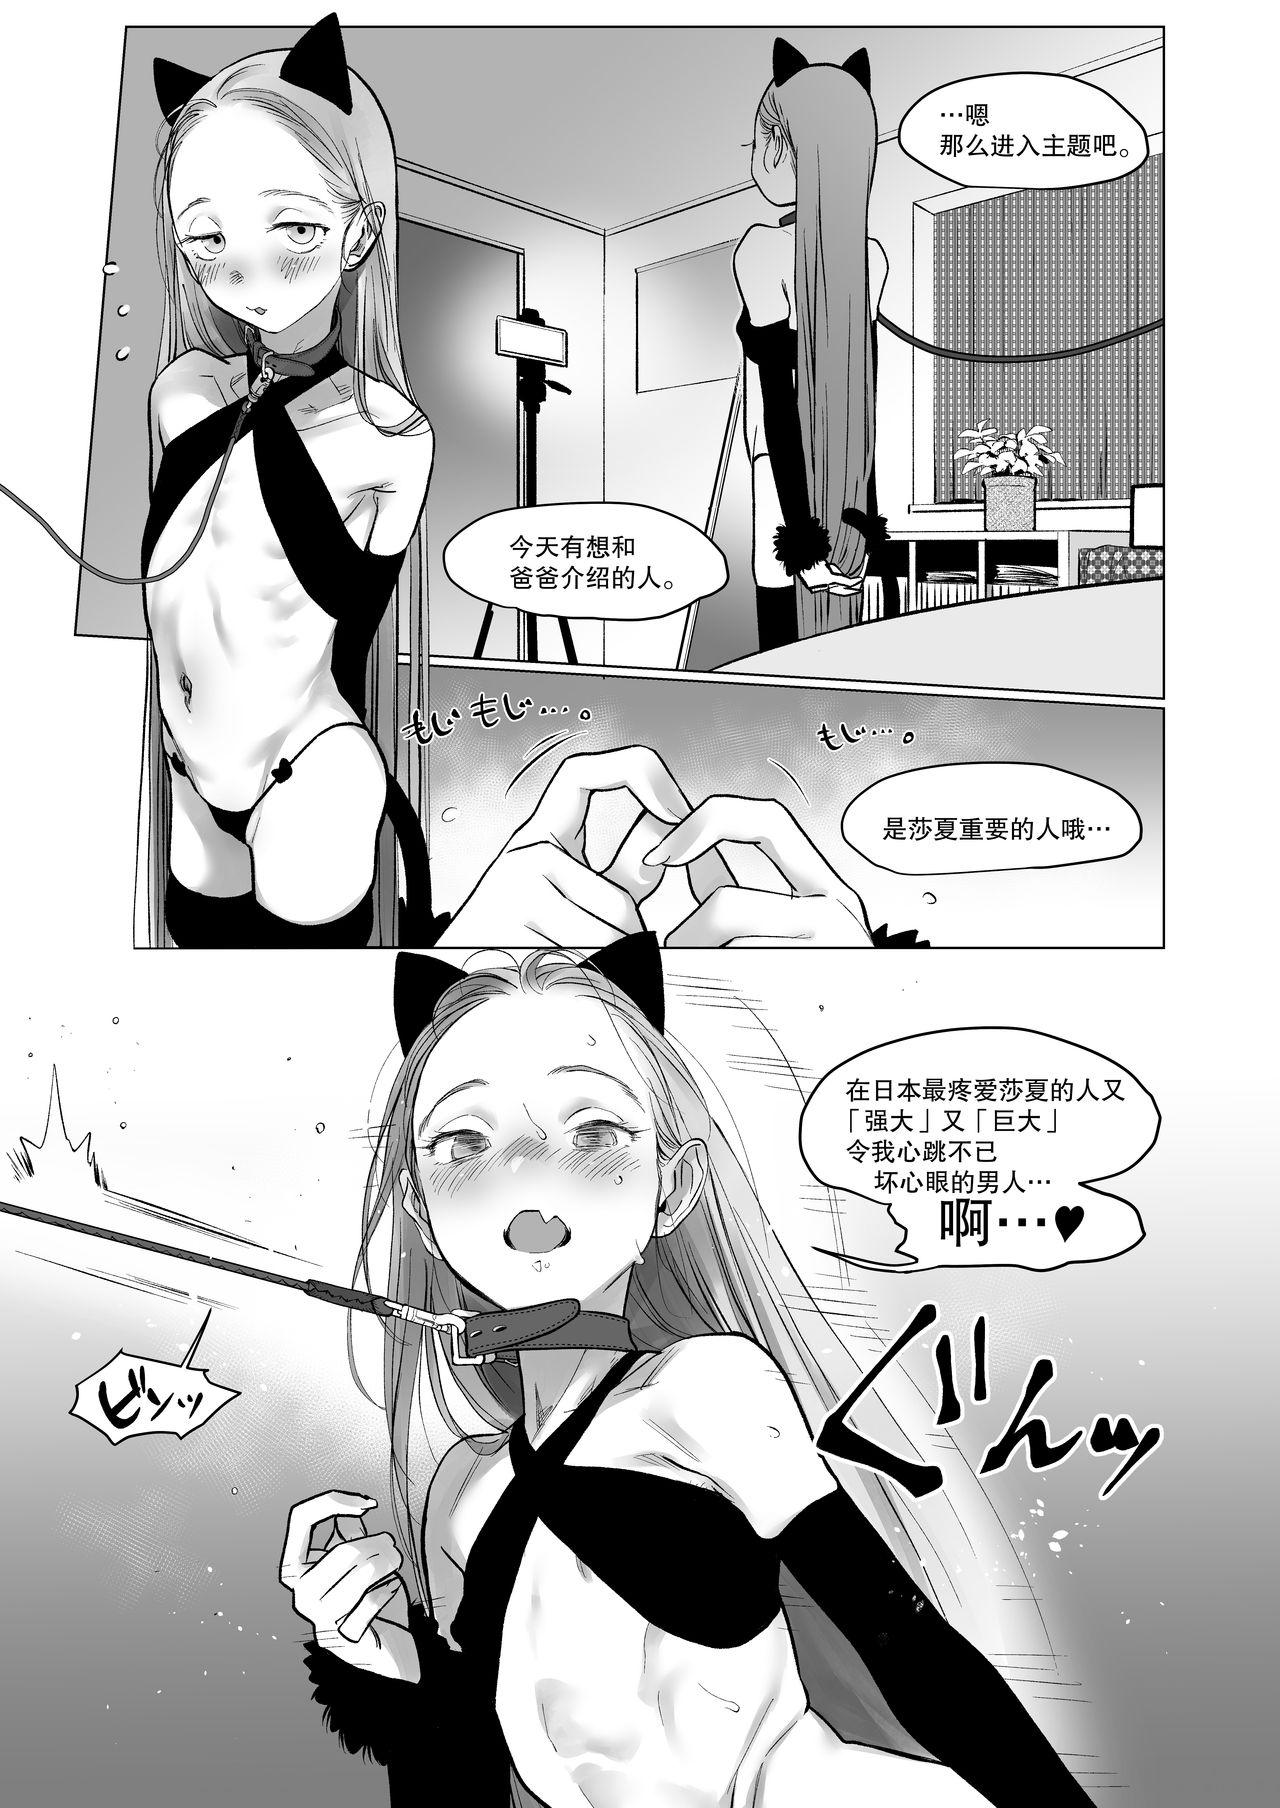 Maid Re: Welcome Sashachan - Original Office Sex - Page 7